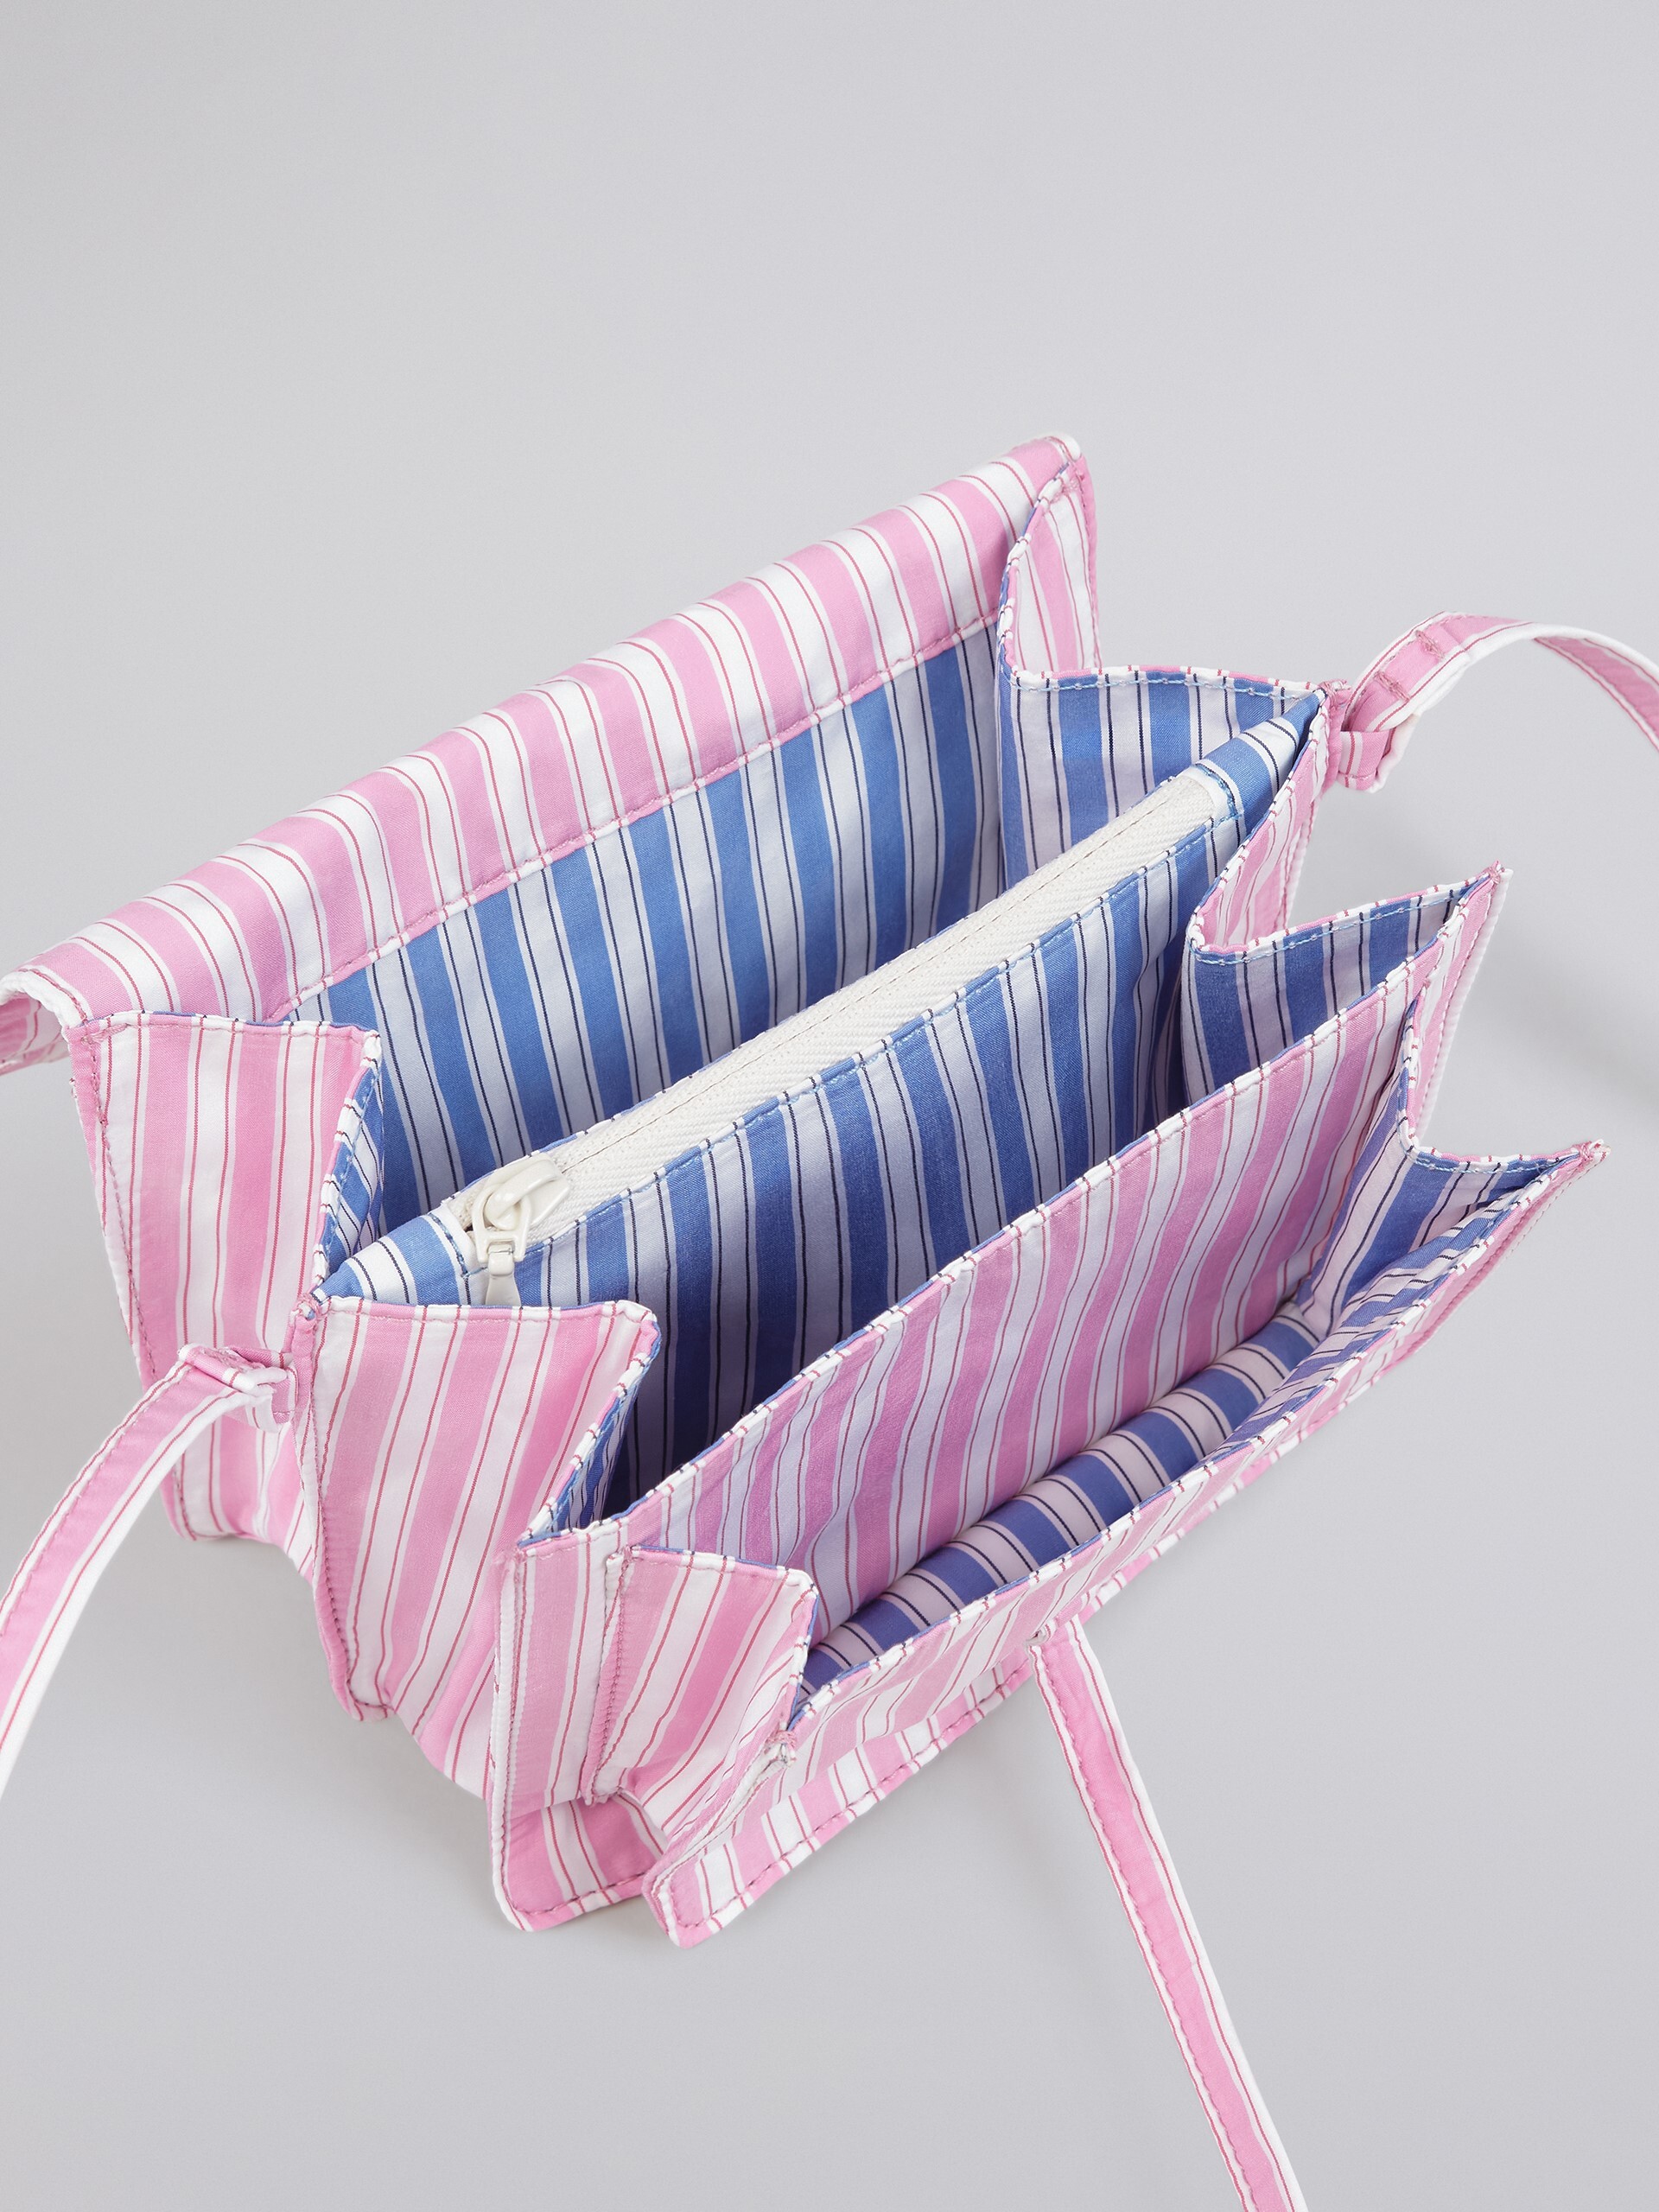 TRUNK SOFT mini bag in pink and white striped poplin - Shoulder Bags - Image 4